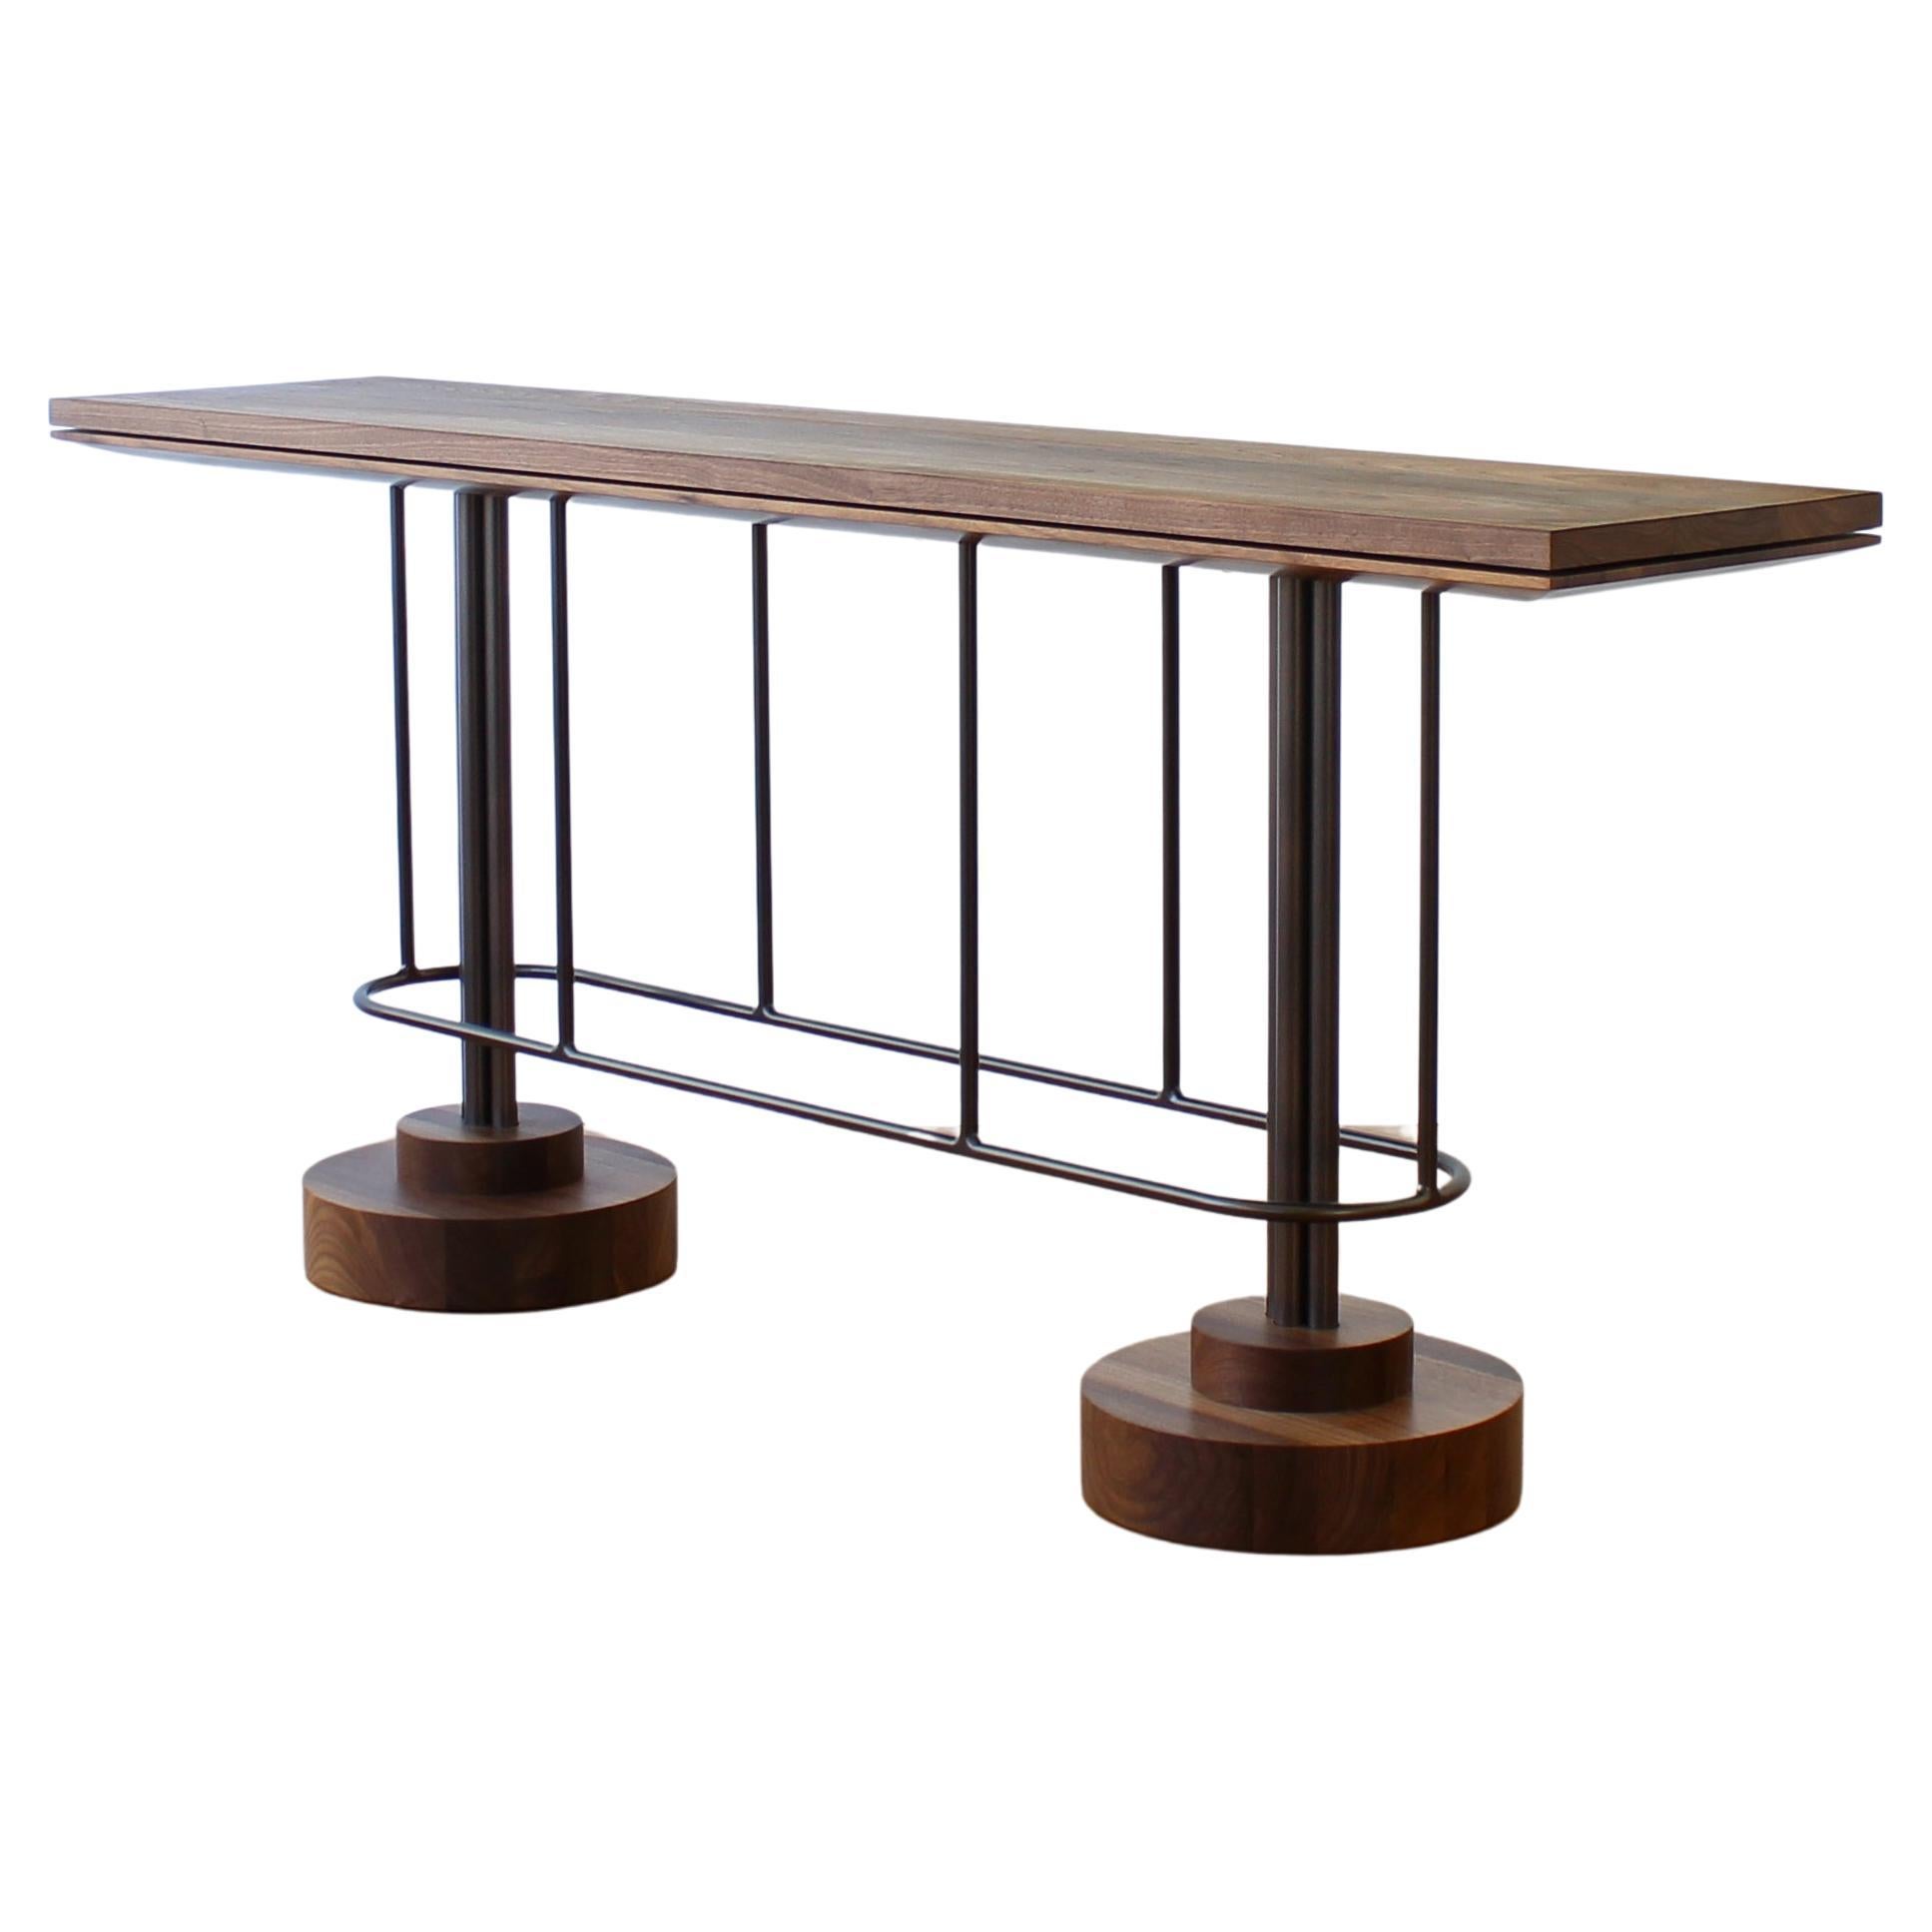 Inez Modern Console or Entryway Table by Crump and Kwash